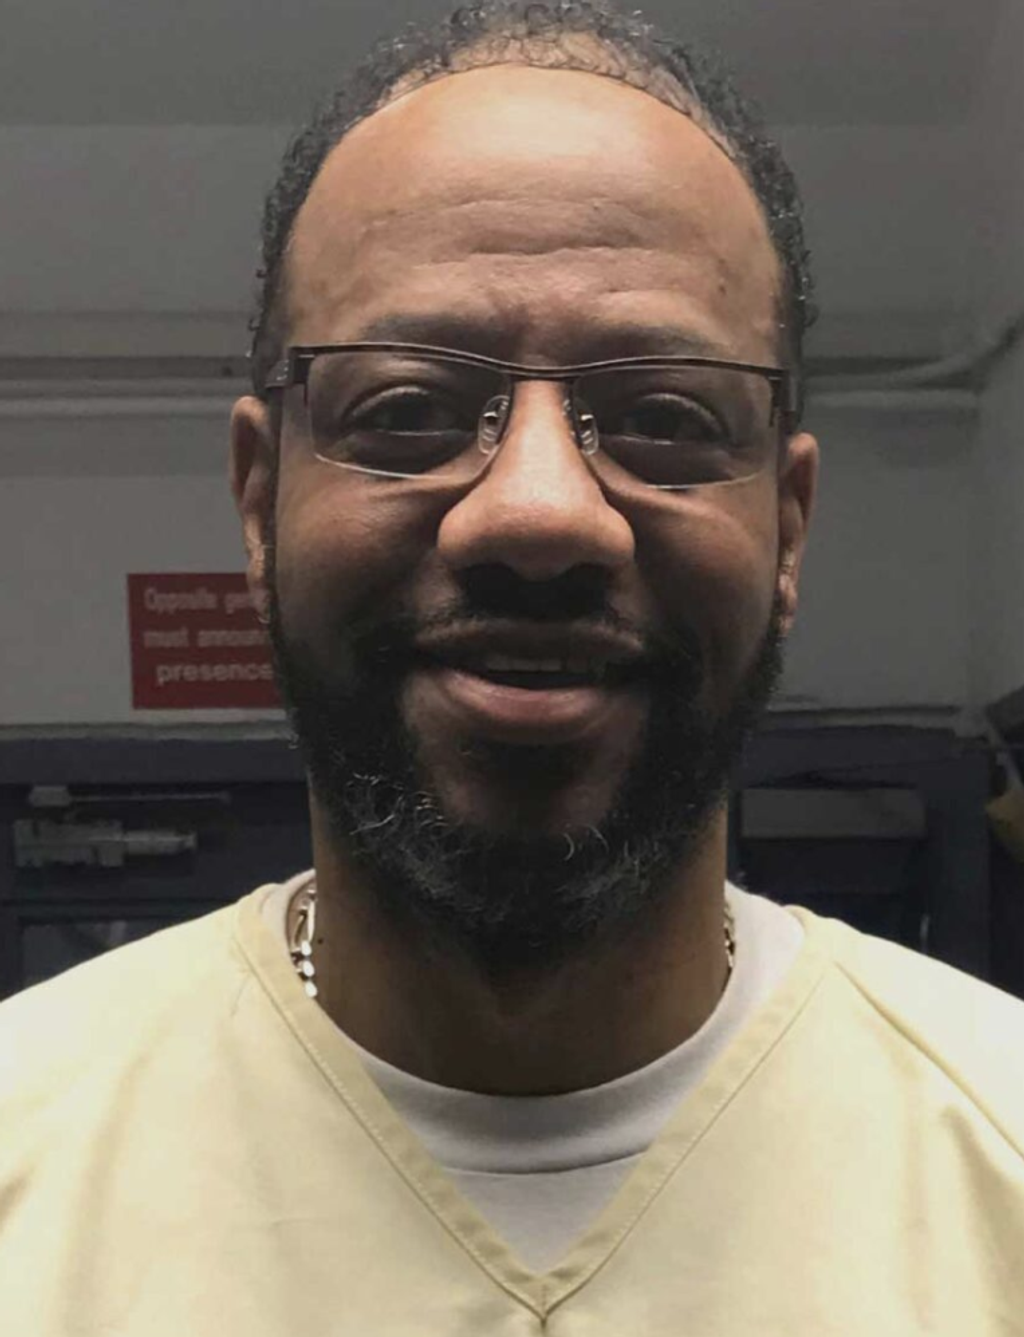 Defense Seeks DNA Testing for Pervis Payne, Alleging Racism, Hidden Evidence, and Intellectual Disability Led to Wrongful Conviction